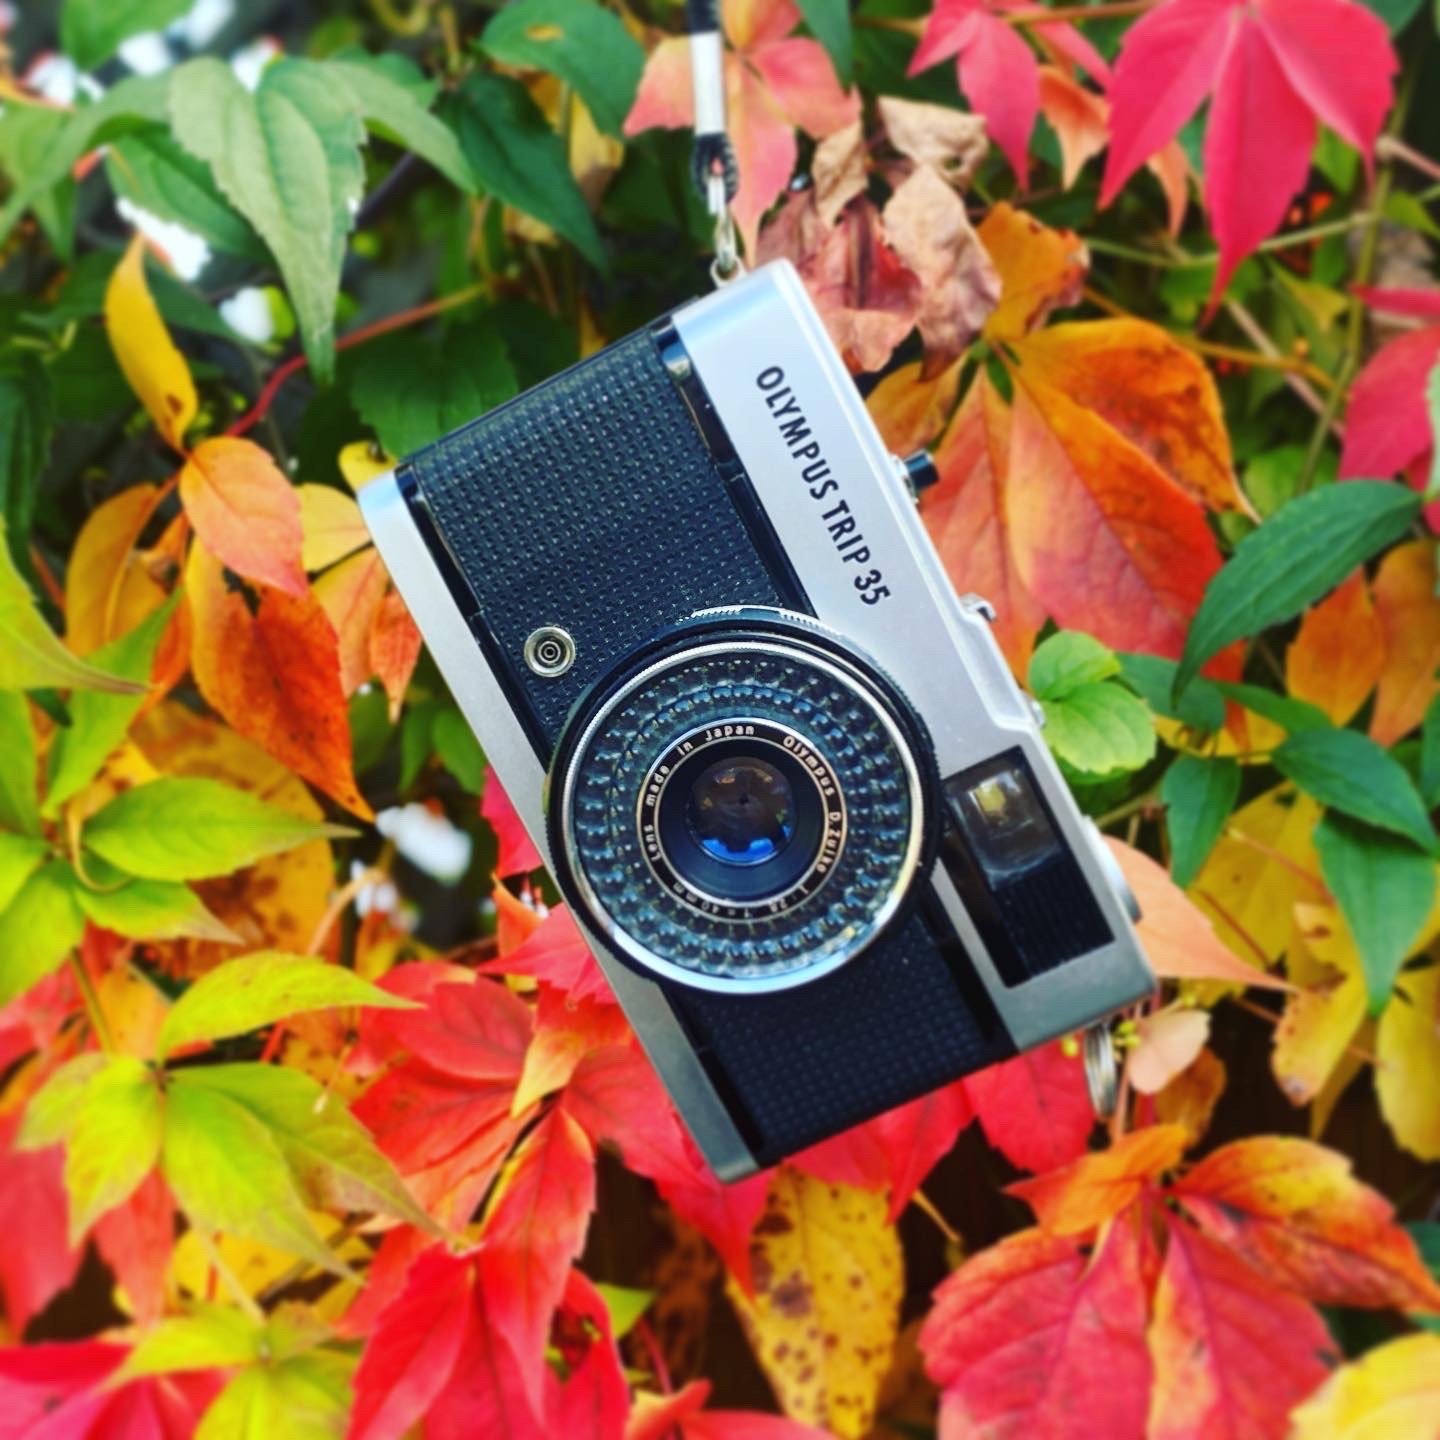 Olympus trip 35 with autumnal background